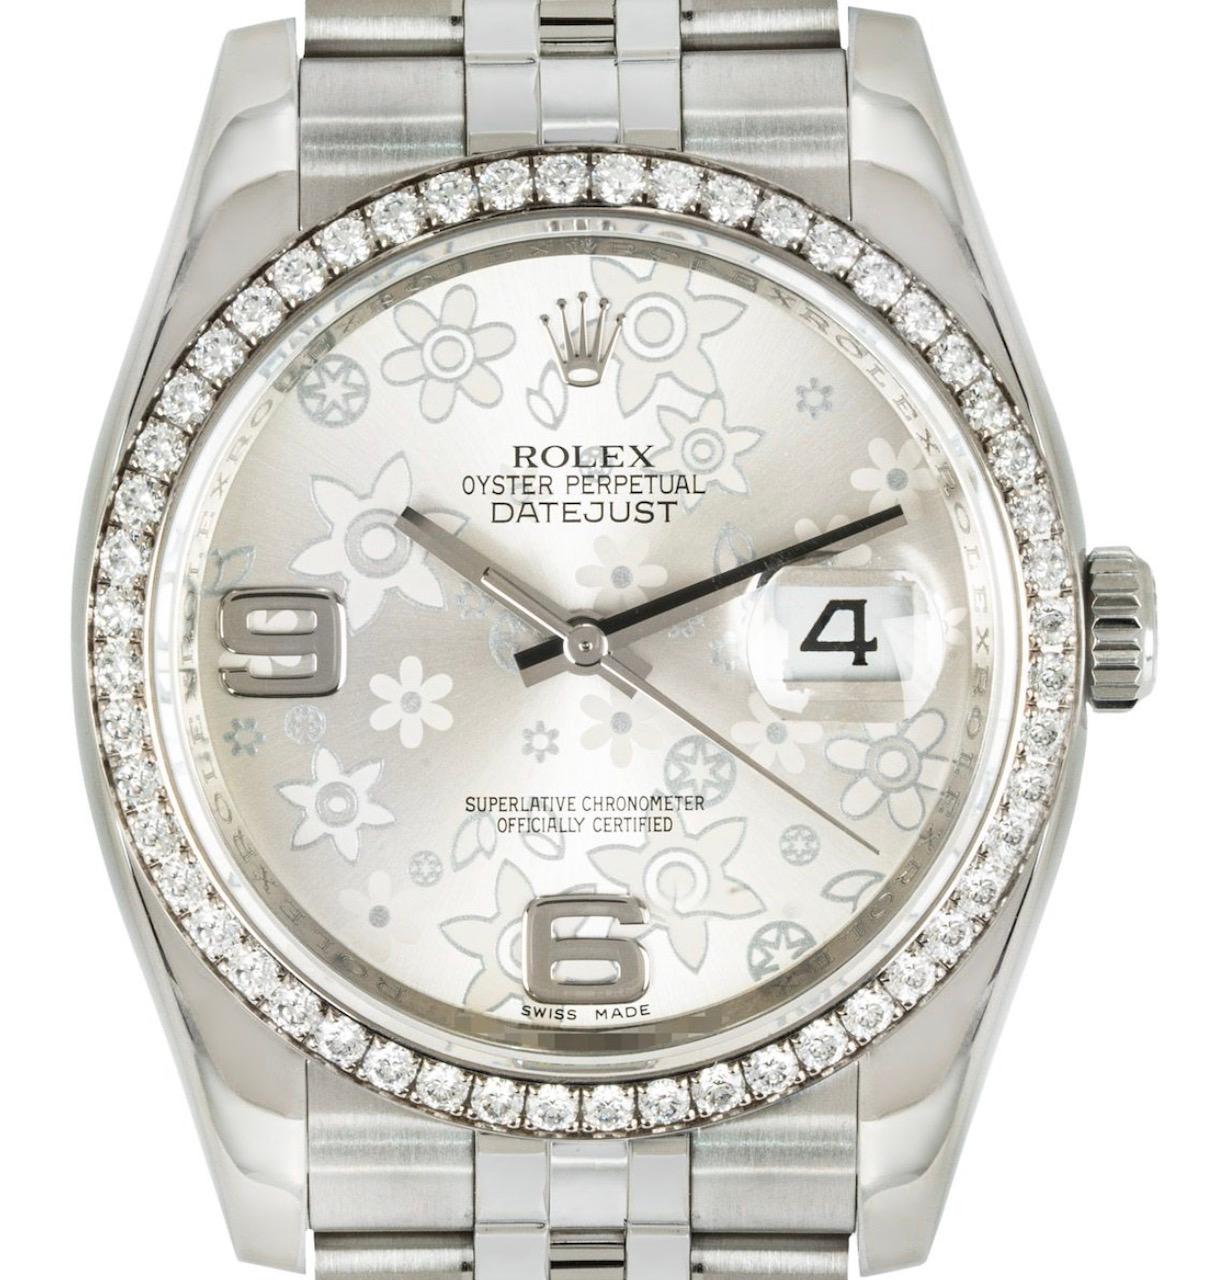 A mens 36mm Datejust by Rolex. Featuring a stunning silver floral dial and a stainless steel bezel set with 52 round brilliant cut diamonds. Fitted with sapphire crystal and a self-winding automatic movement. The watch is further equipped with a